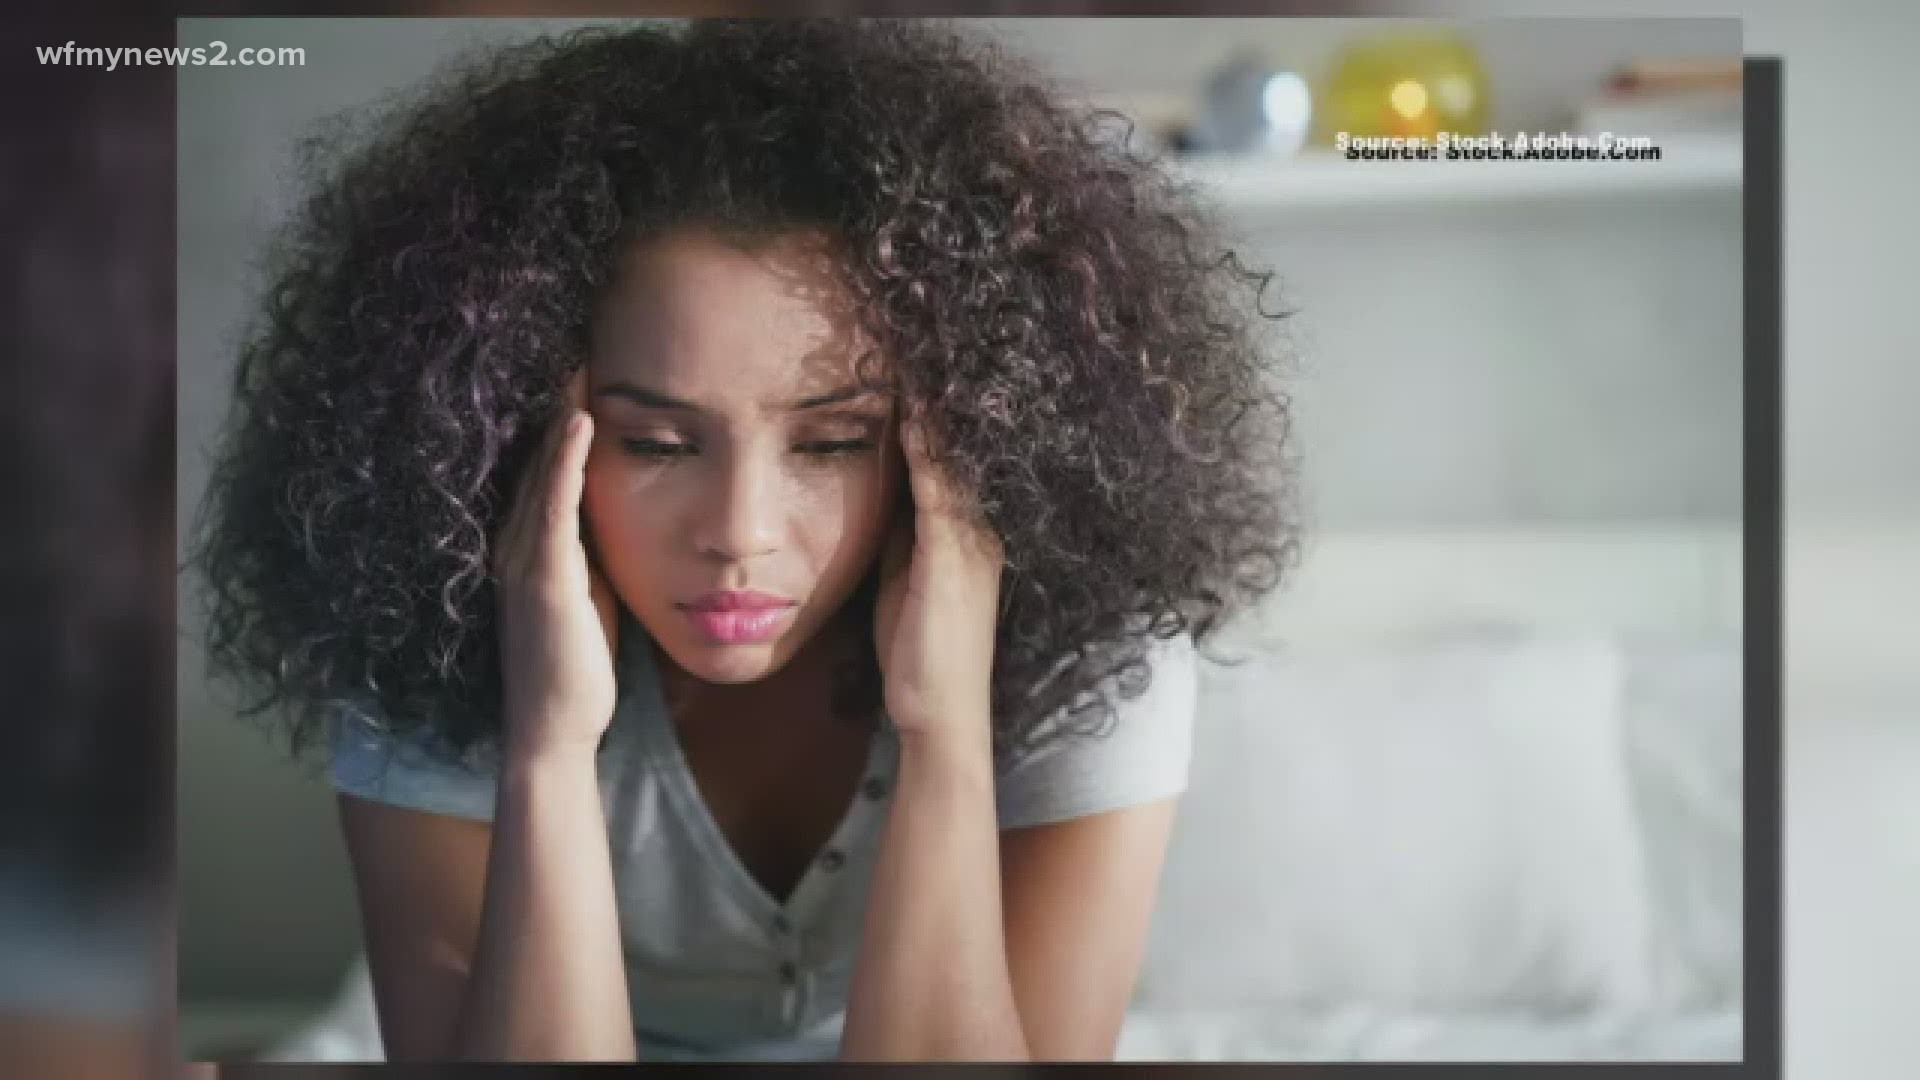 Local psychotherapist weighs in on increase in anxiety, how to manage.